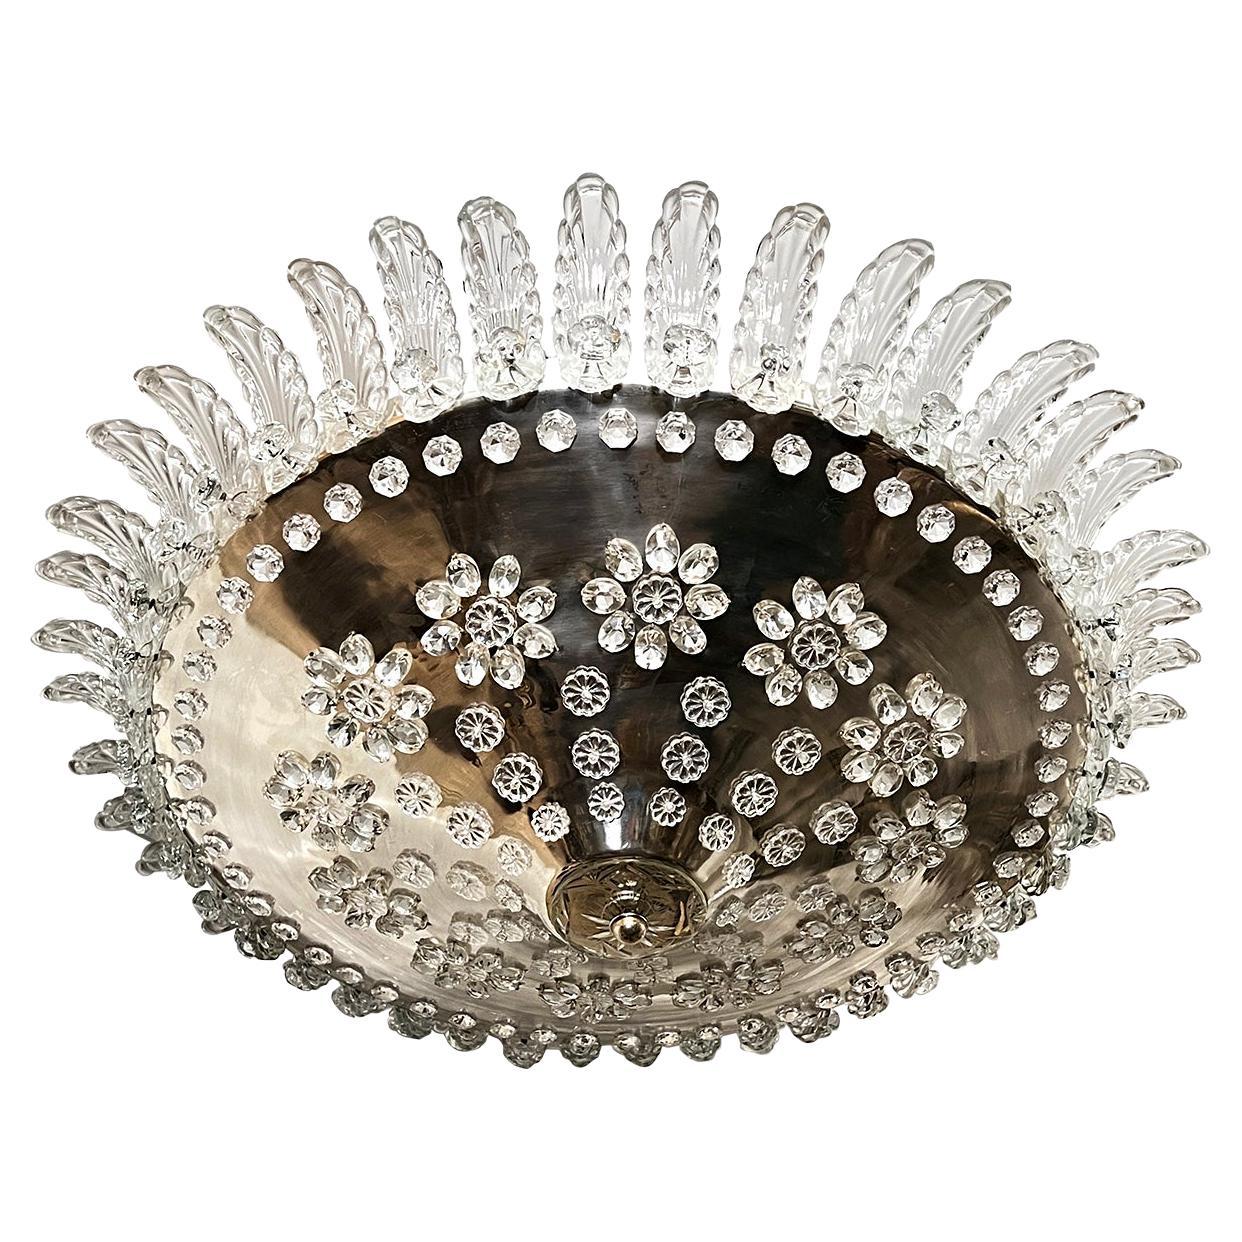 Silver Plated Light Fixture with Crystal Insets